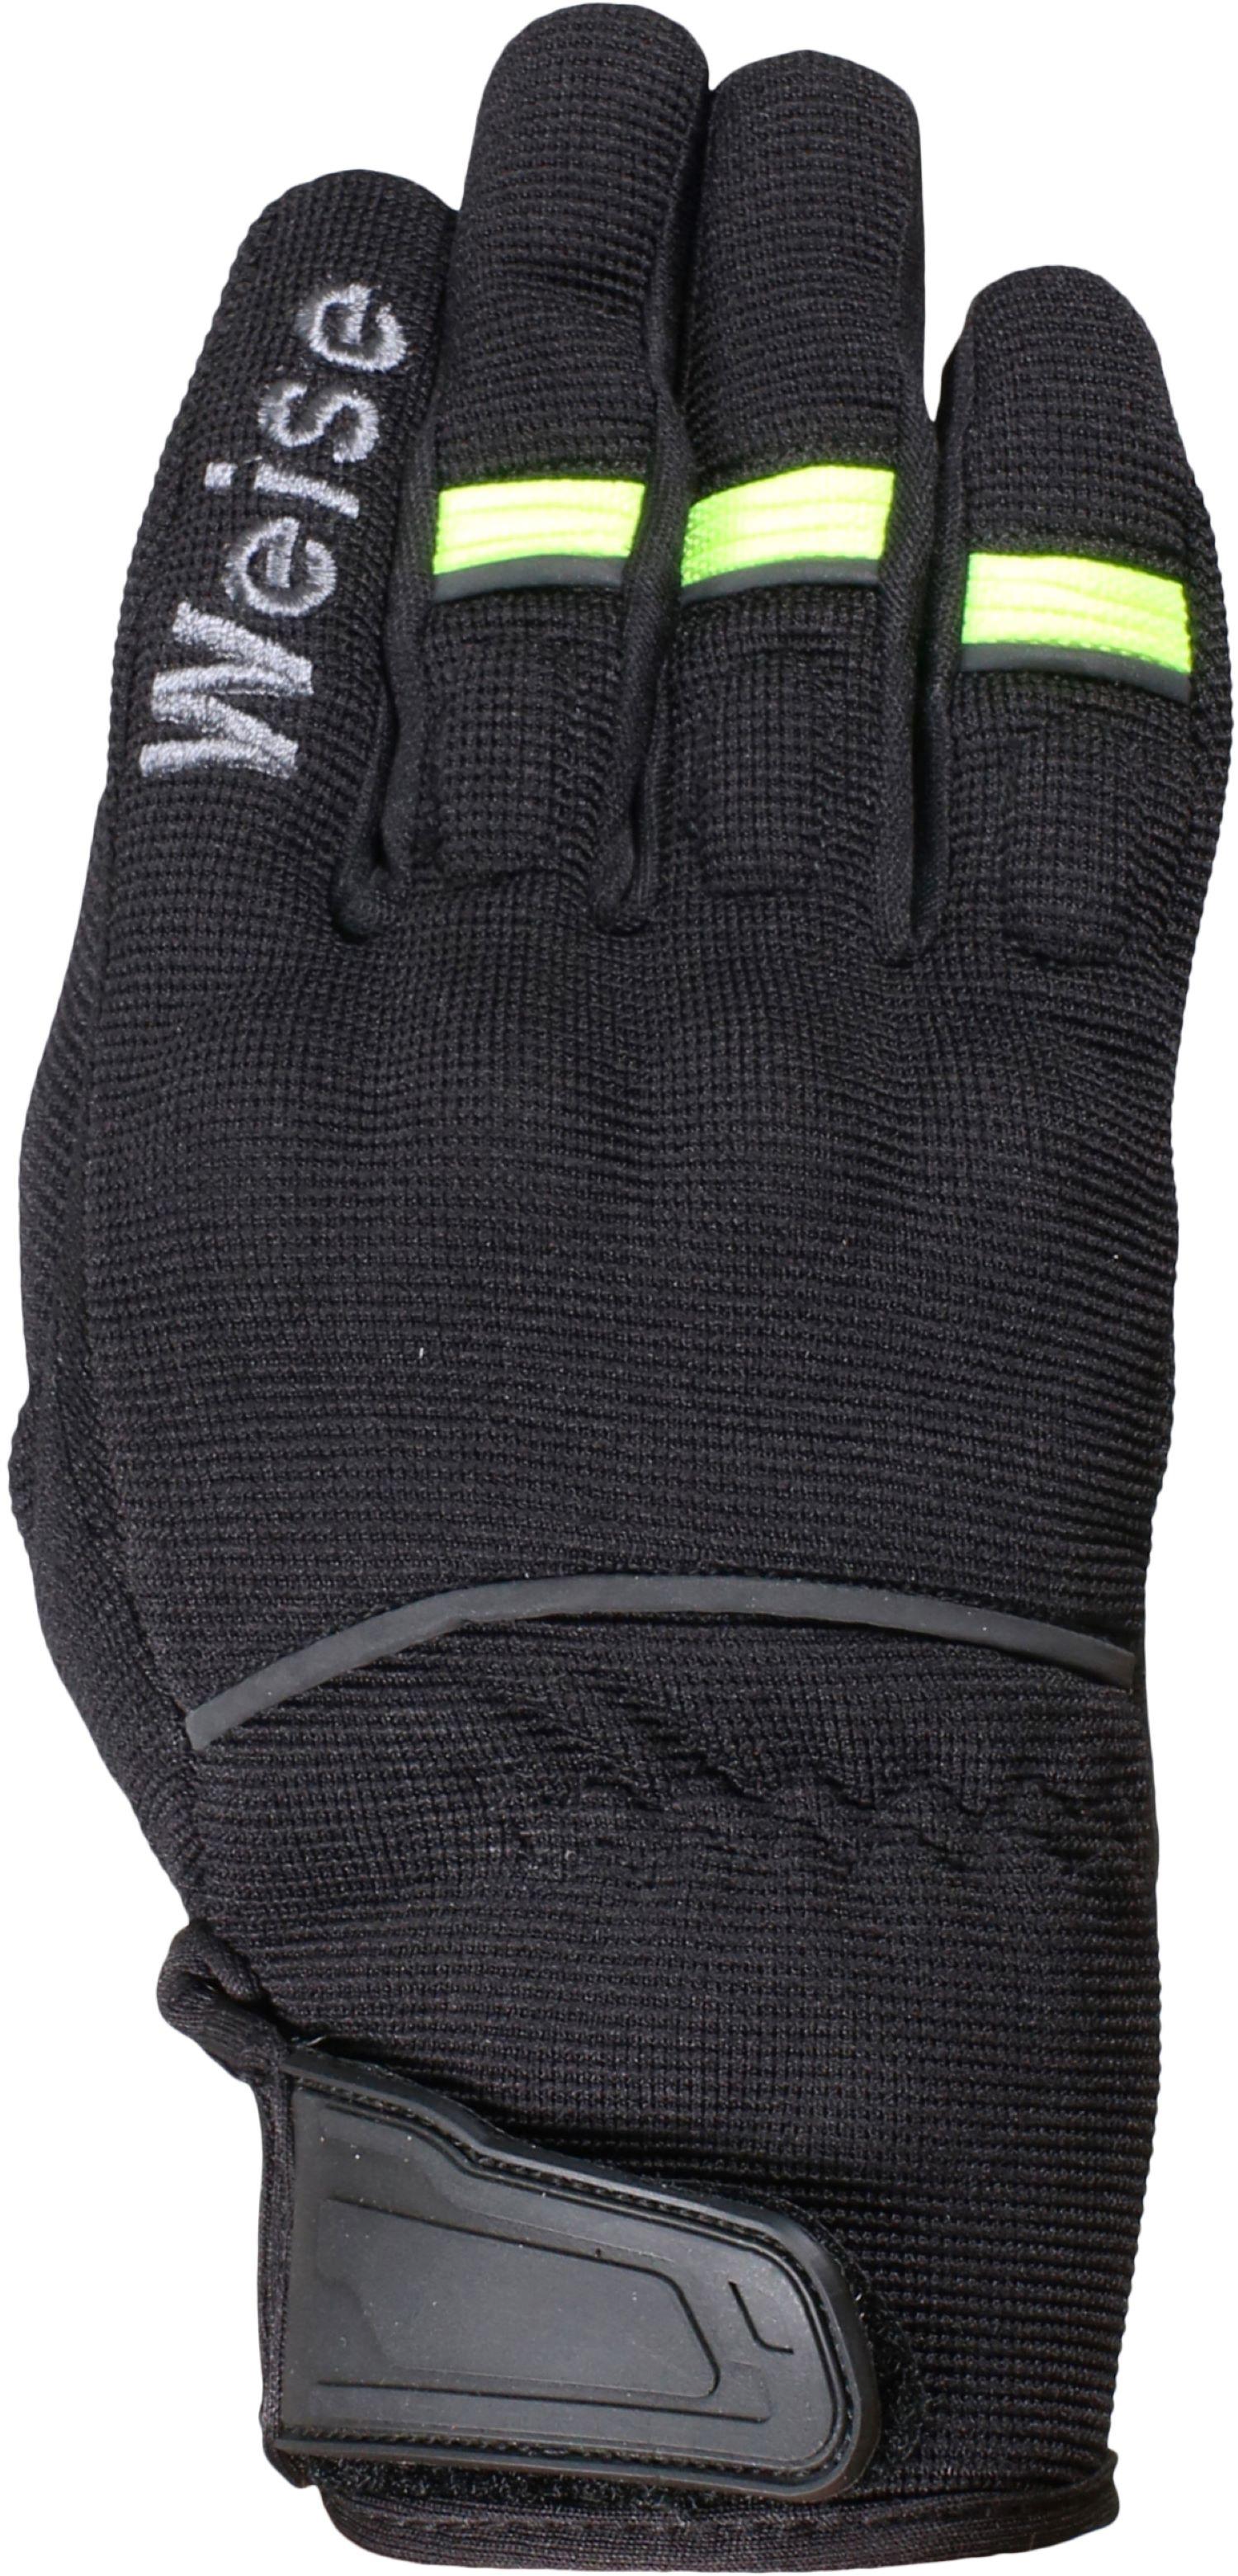 Weise Motorcycle Pit Gloves - Black/Neon, L